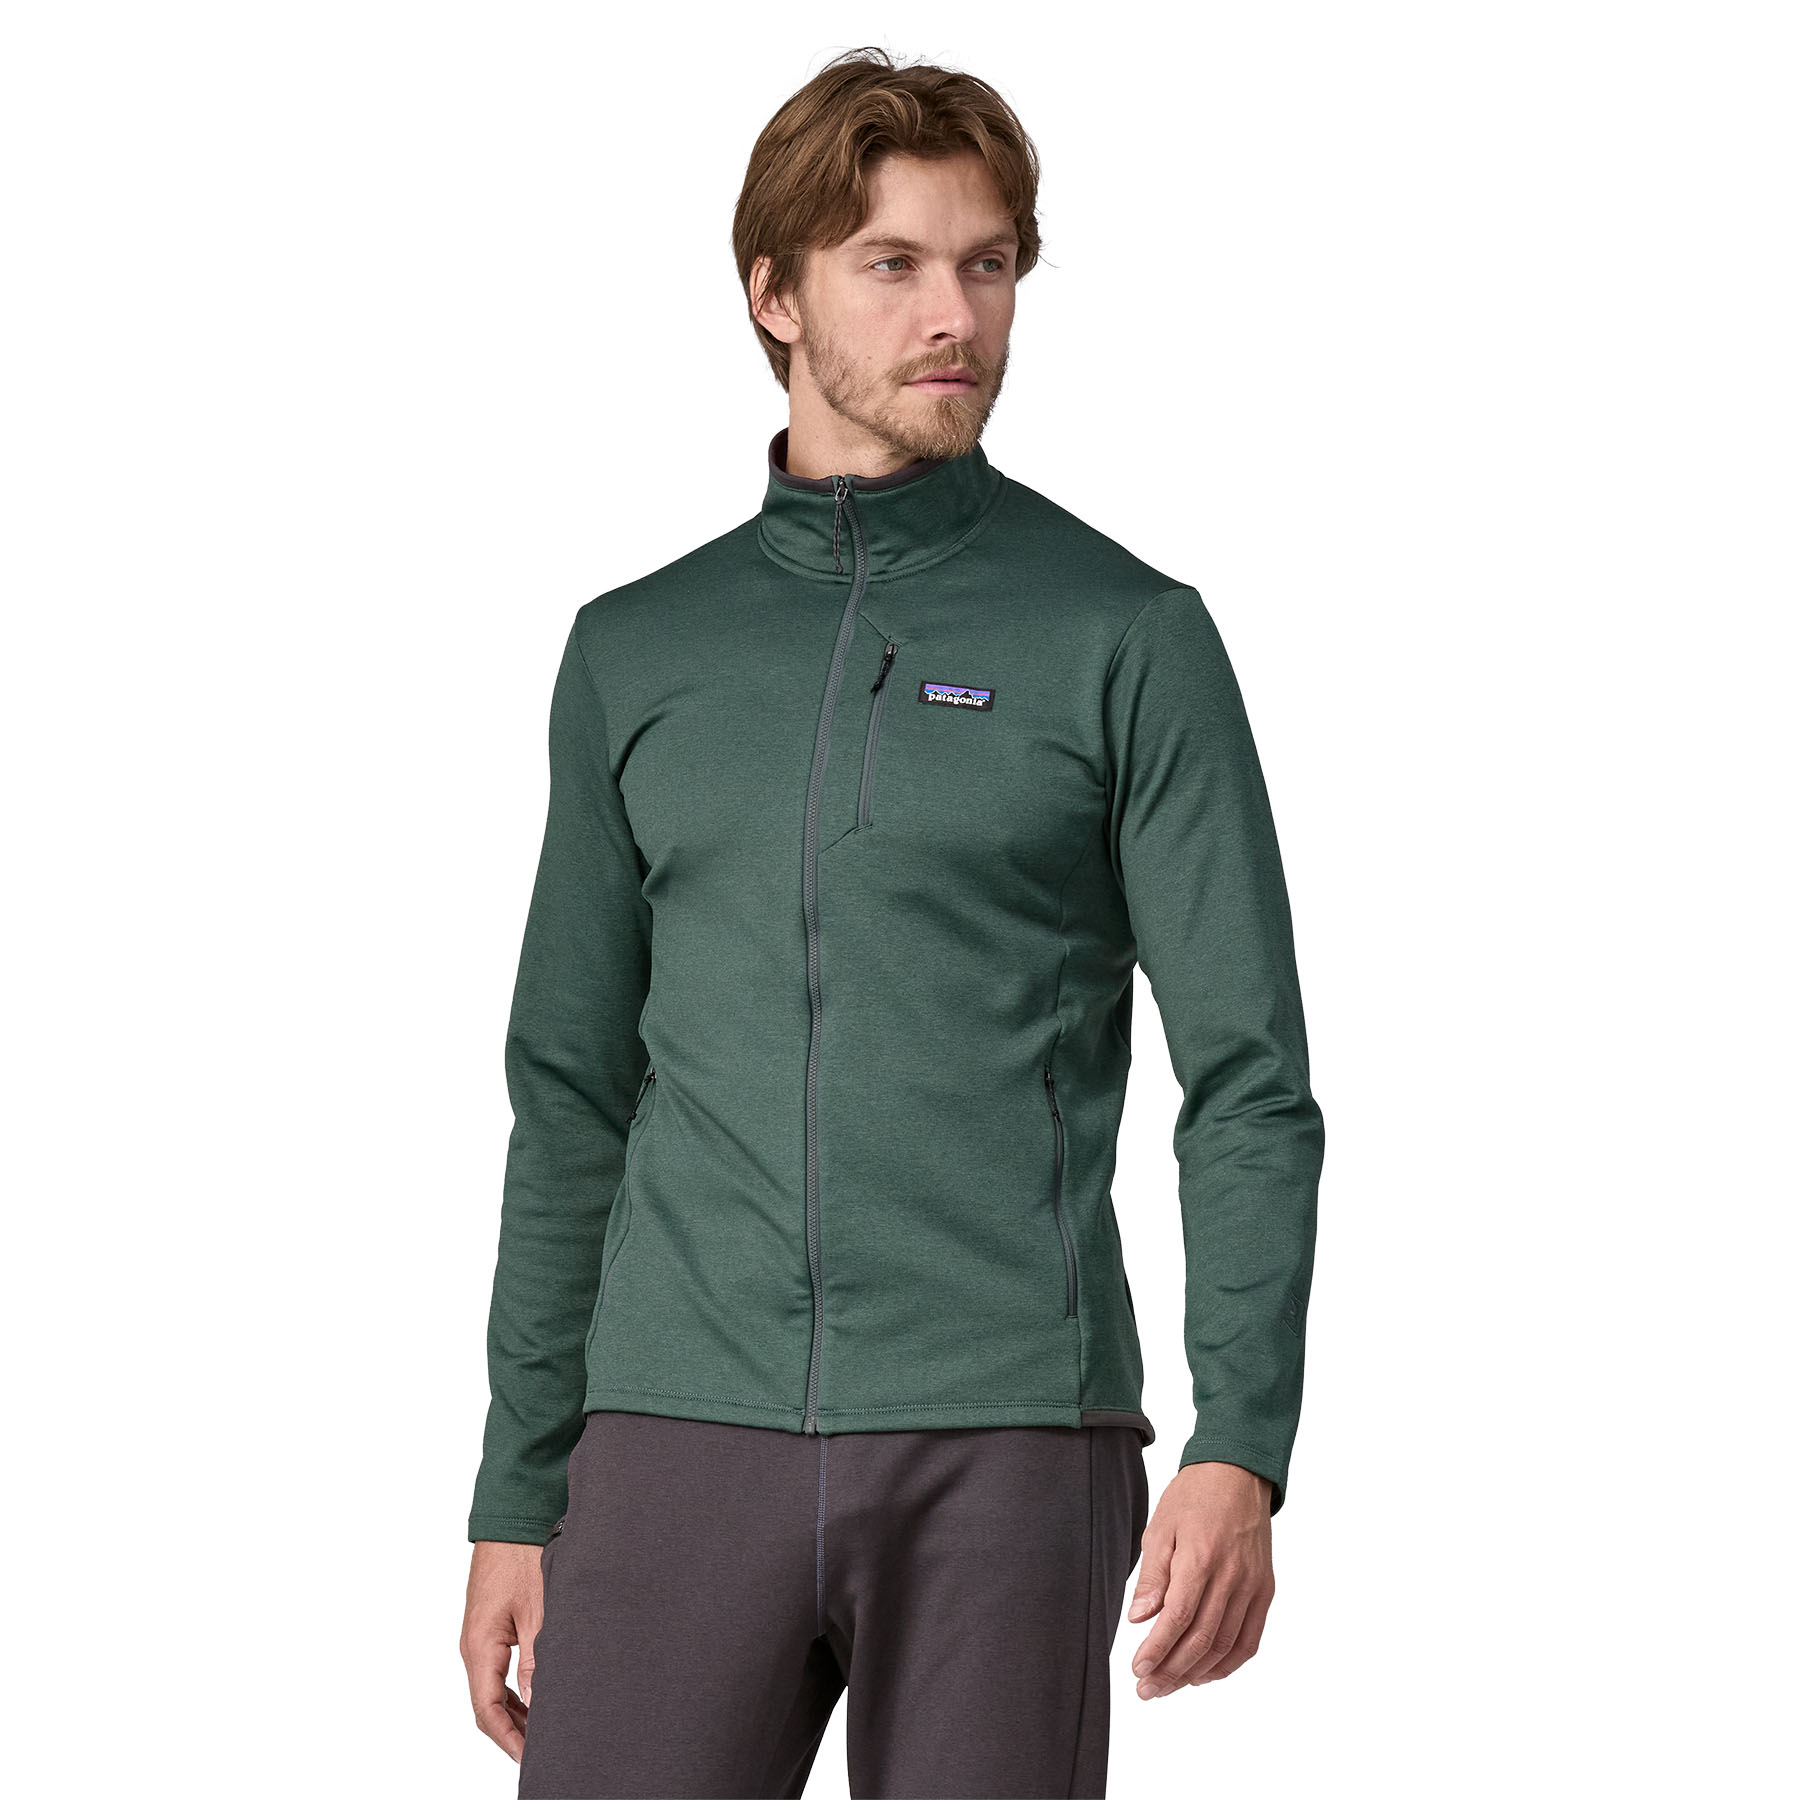 R1 Daily Jacket (Nouveau Green/Northern Green)